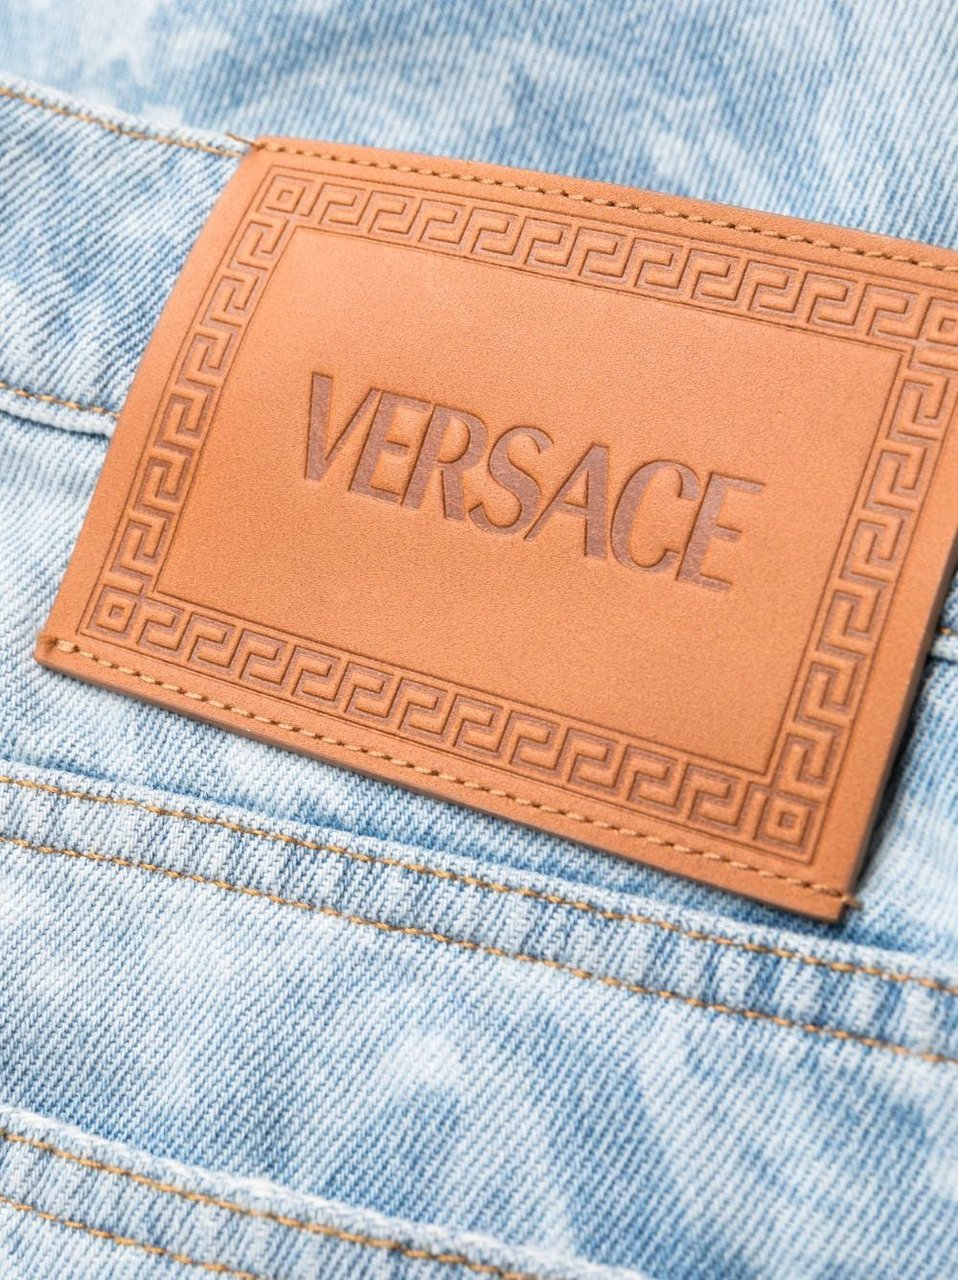 Versace All-Over Logo Jeans Blauw